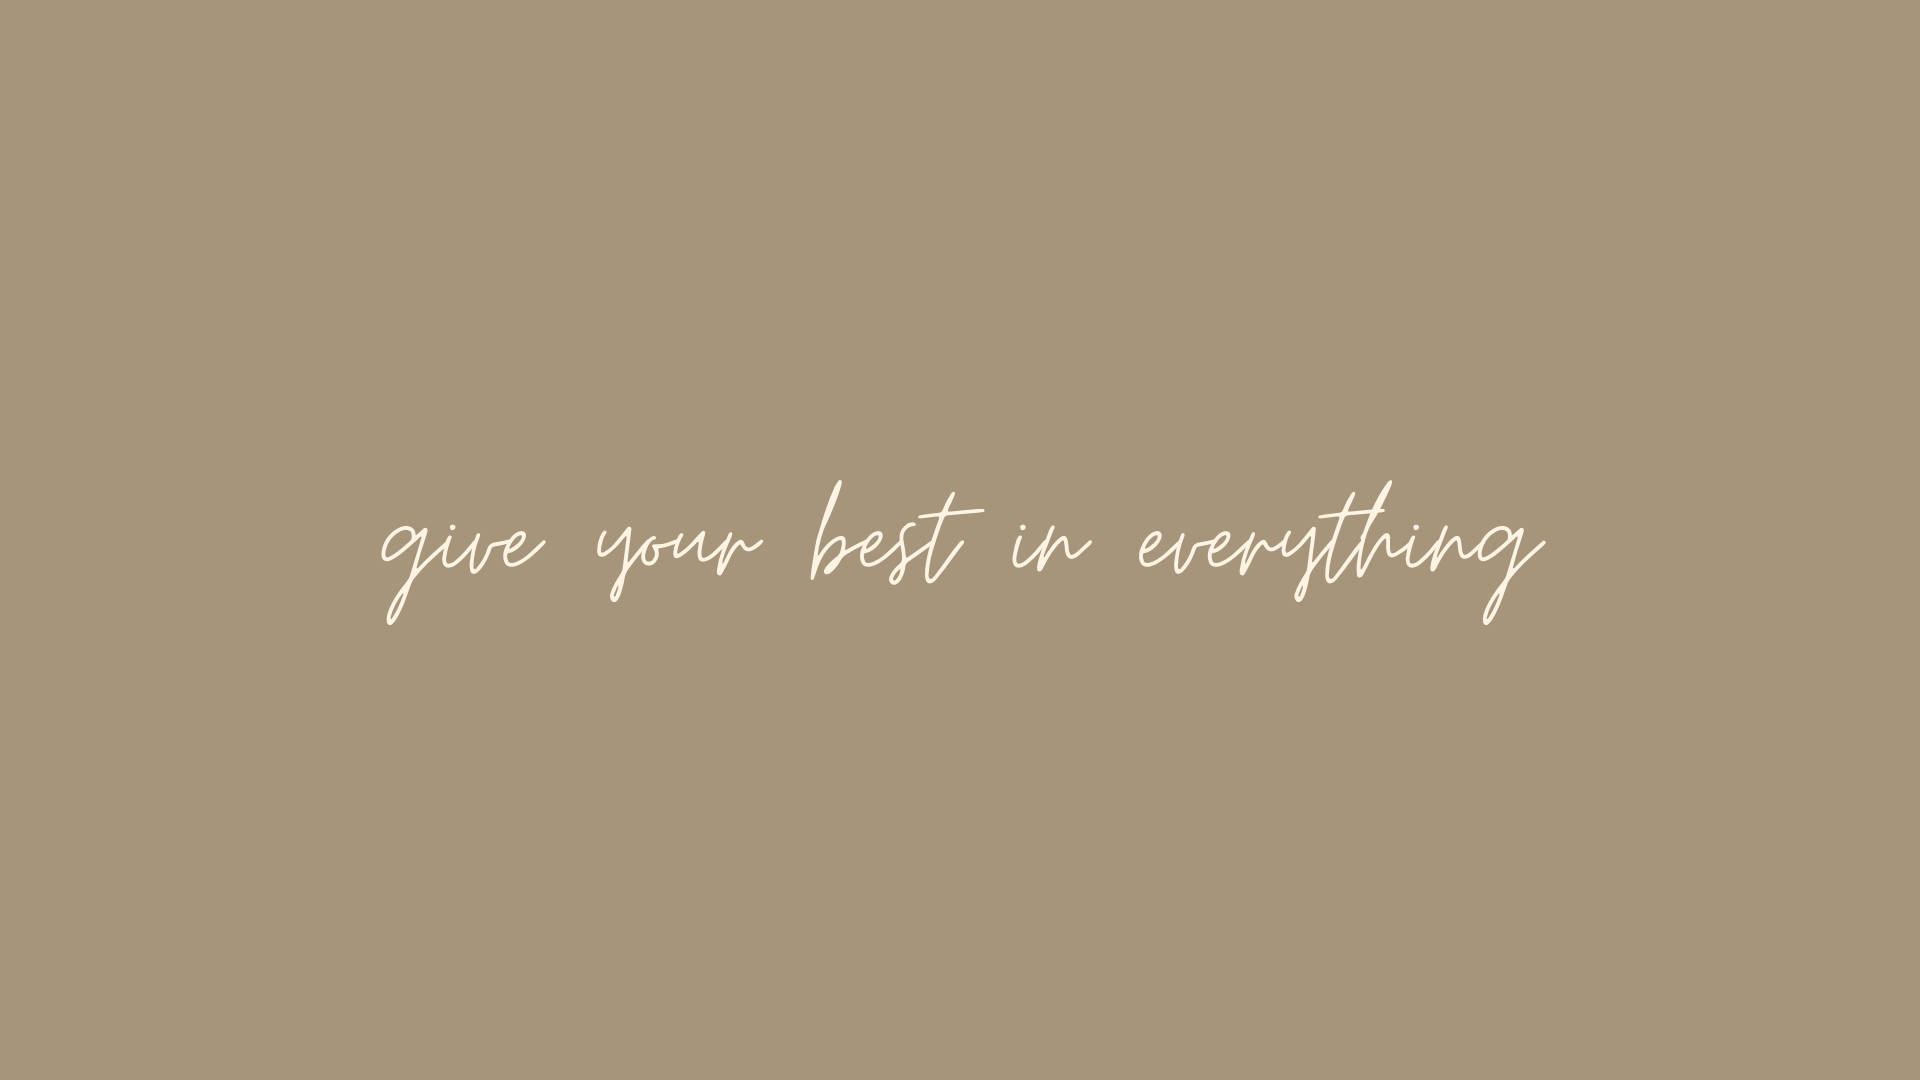 Give your best in everything - Motivational